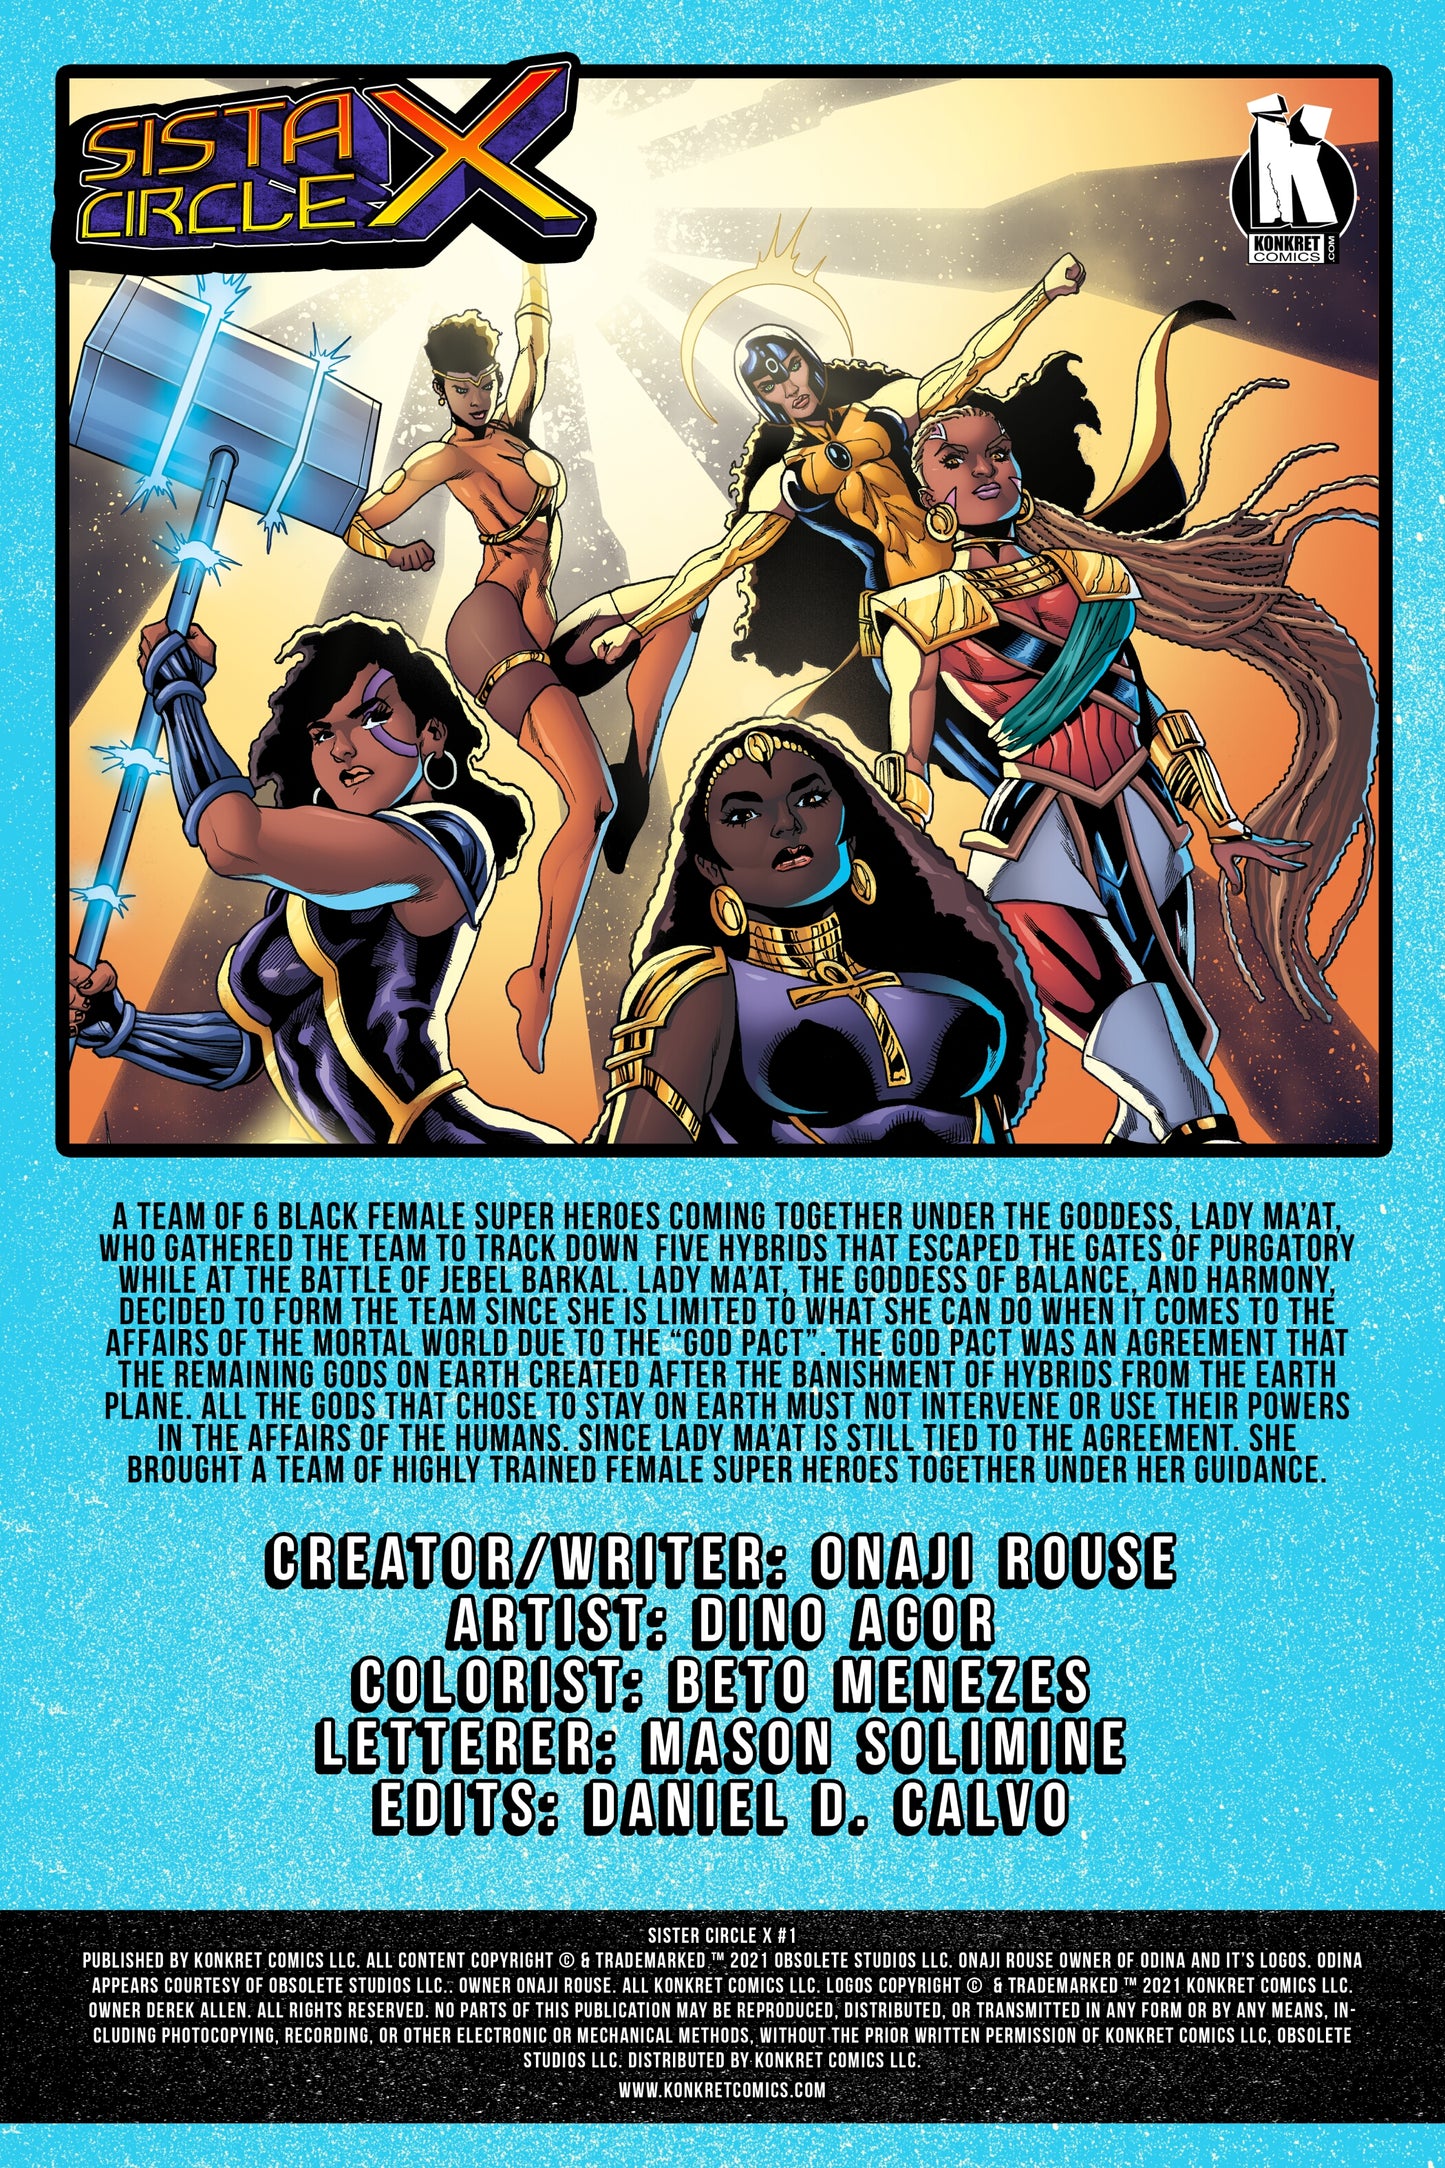 Sista Circle X #1 (Signed Copy) (Digital Included)